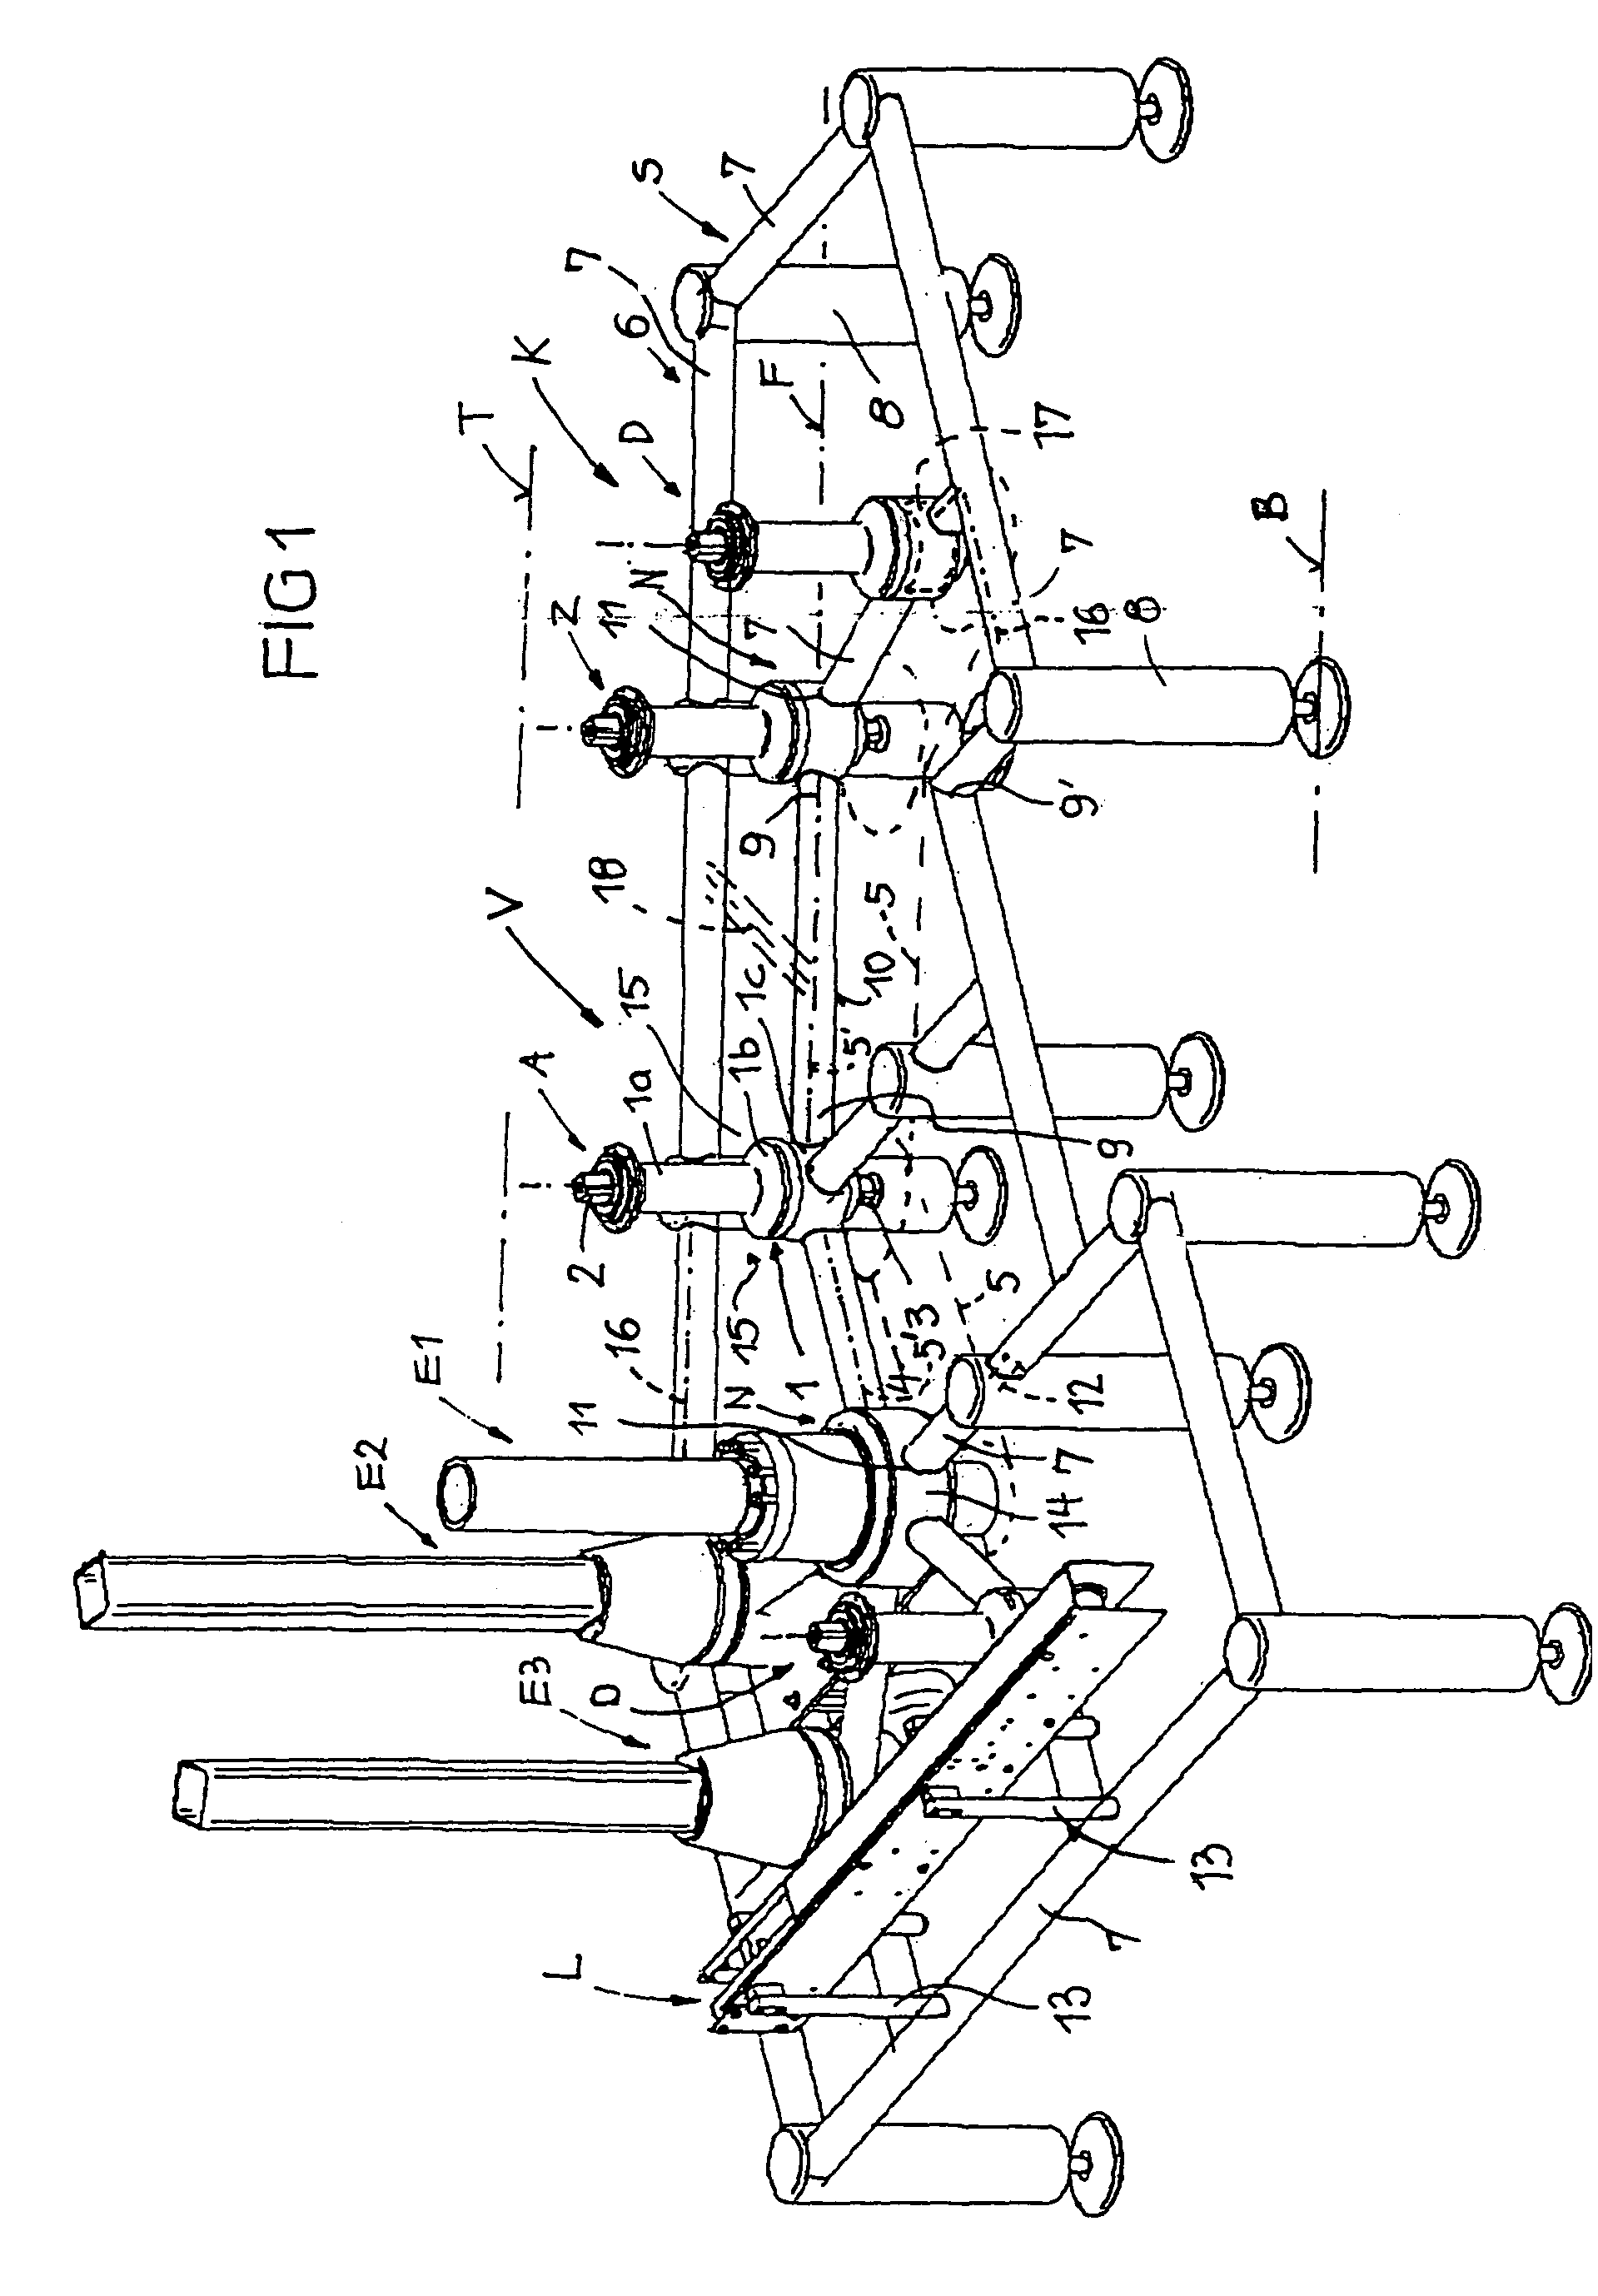 Apparatus support structure